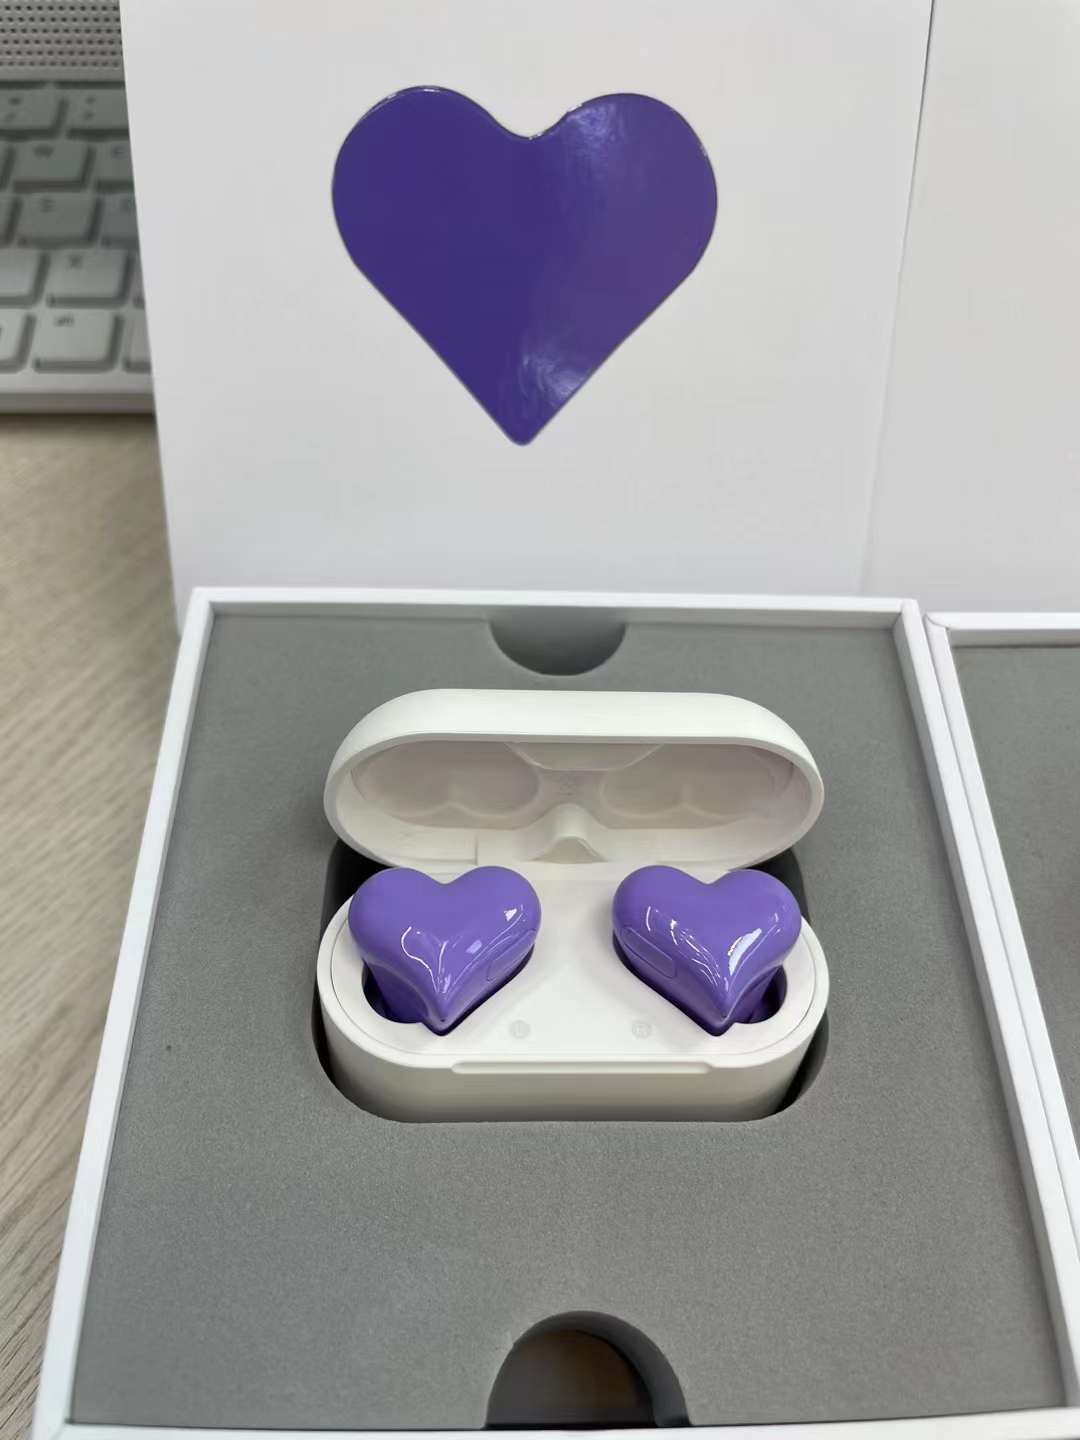 Heart Model Buds Pro Tws Stereo Hands Wireless Charging Headphones With Charger Box Power Display